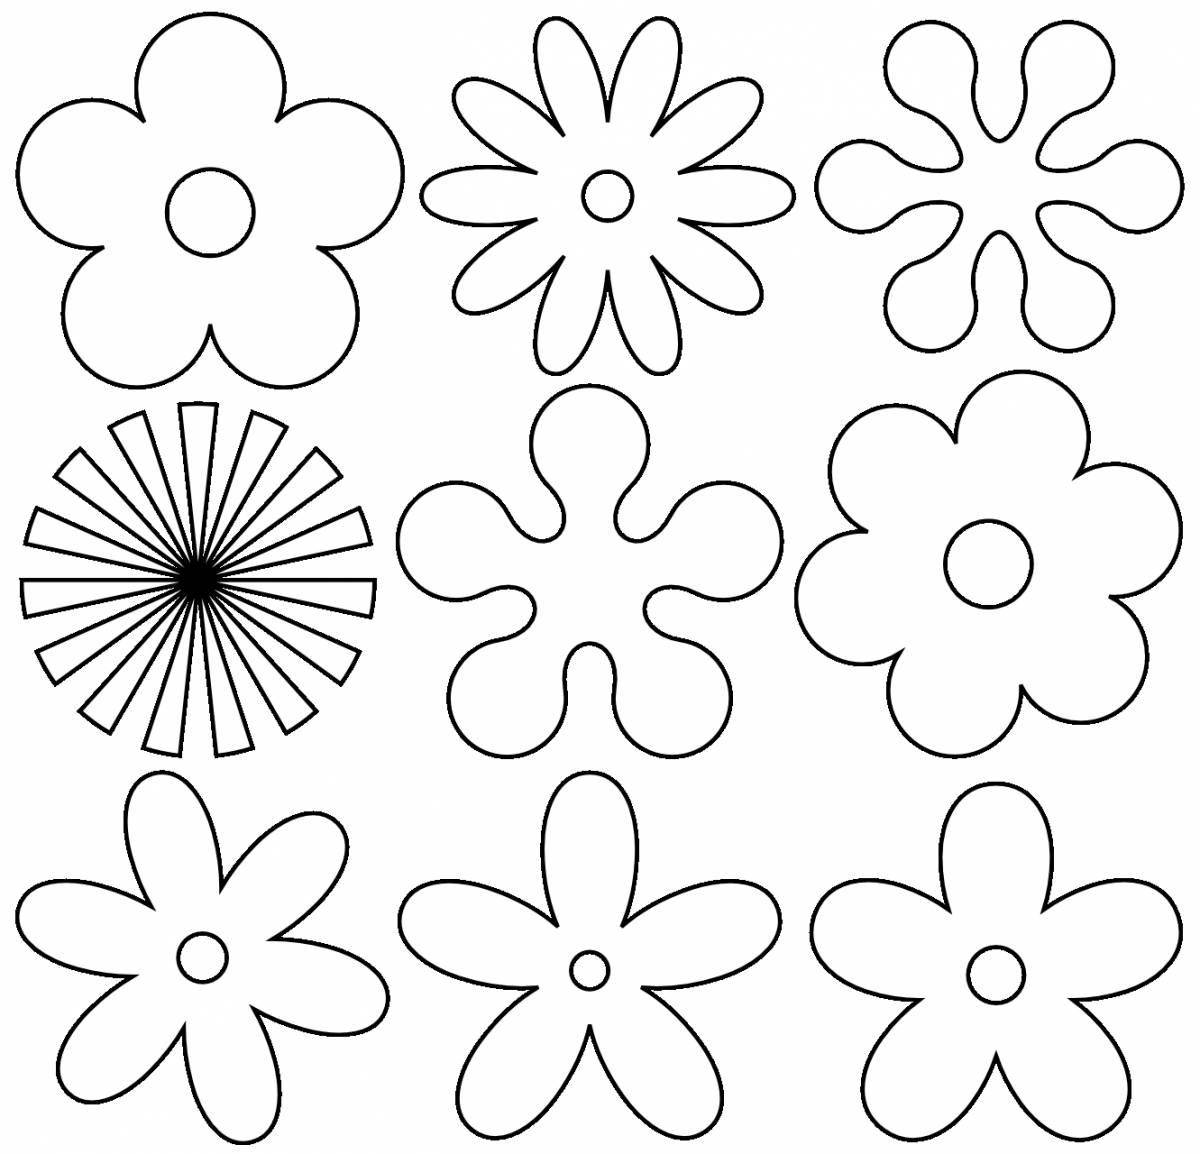 Little flowers coloring pages